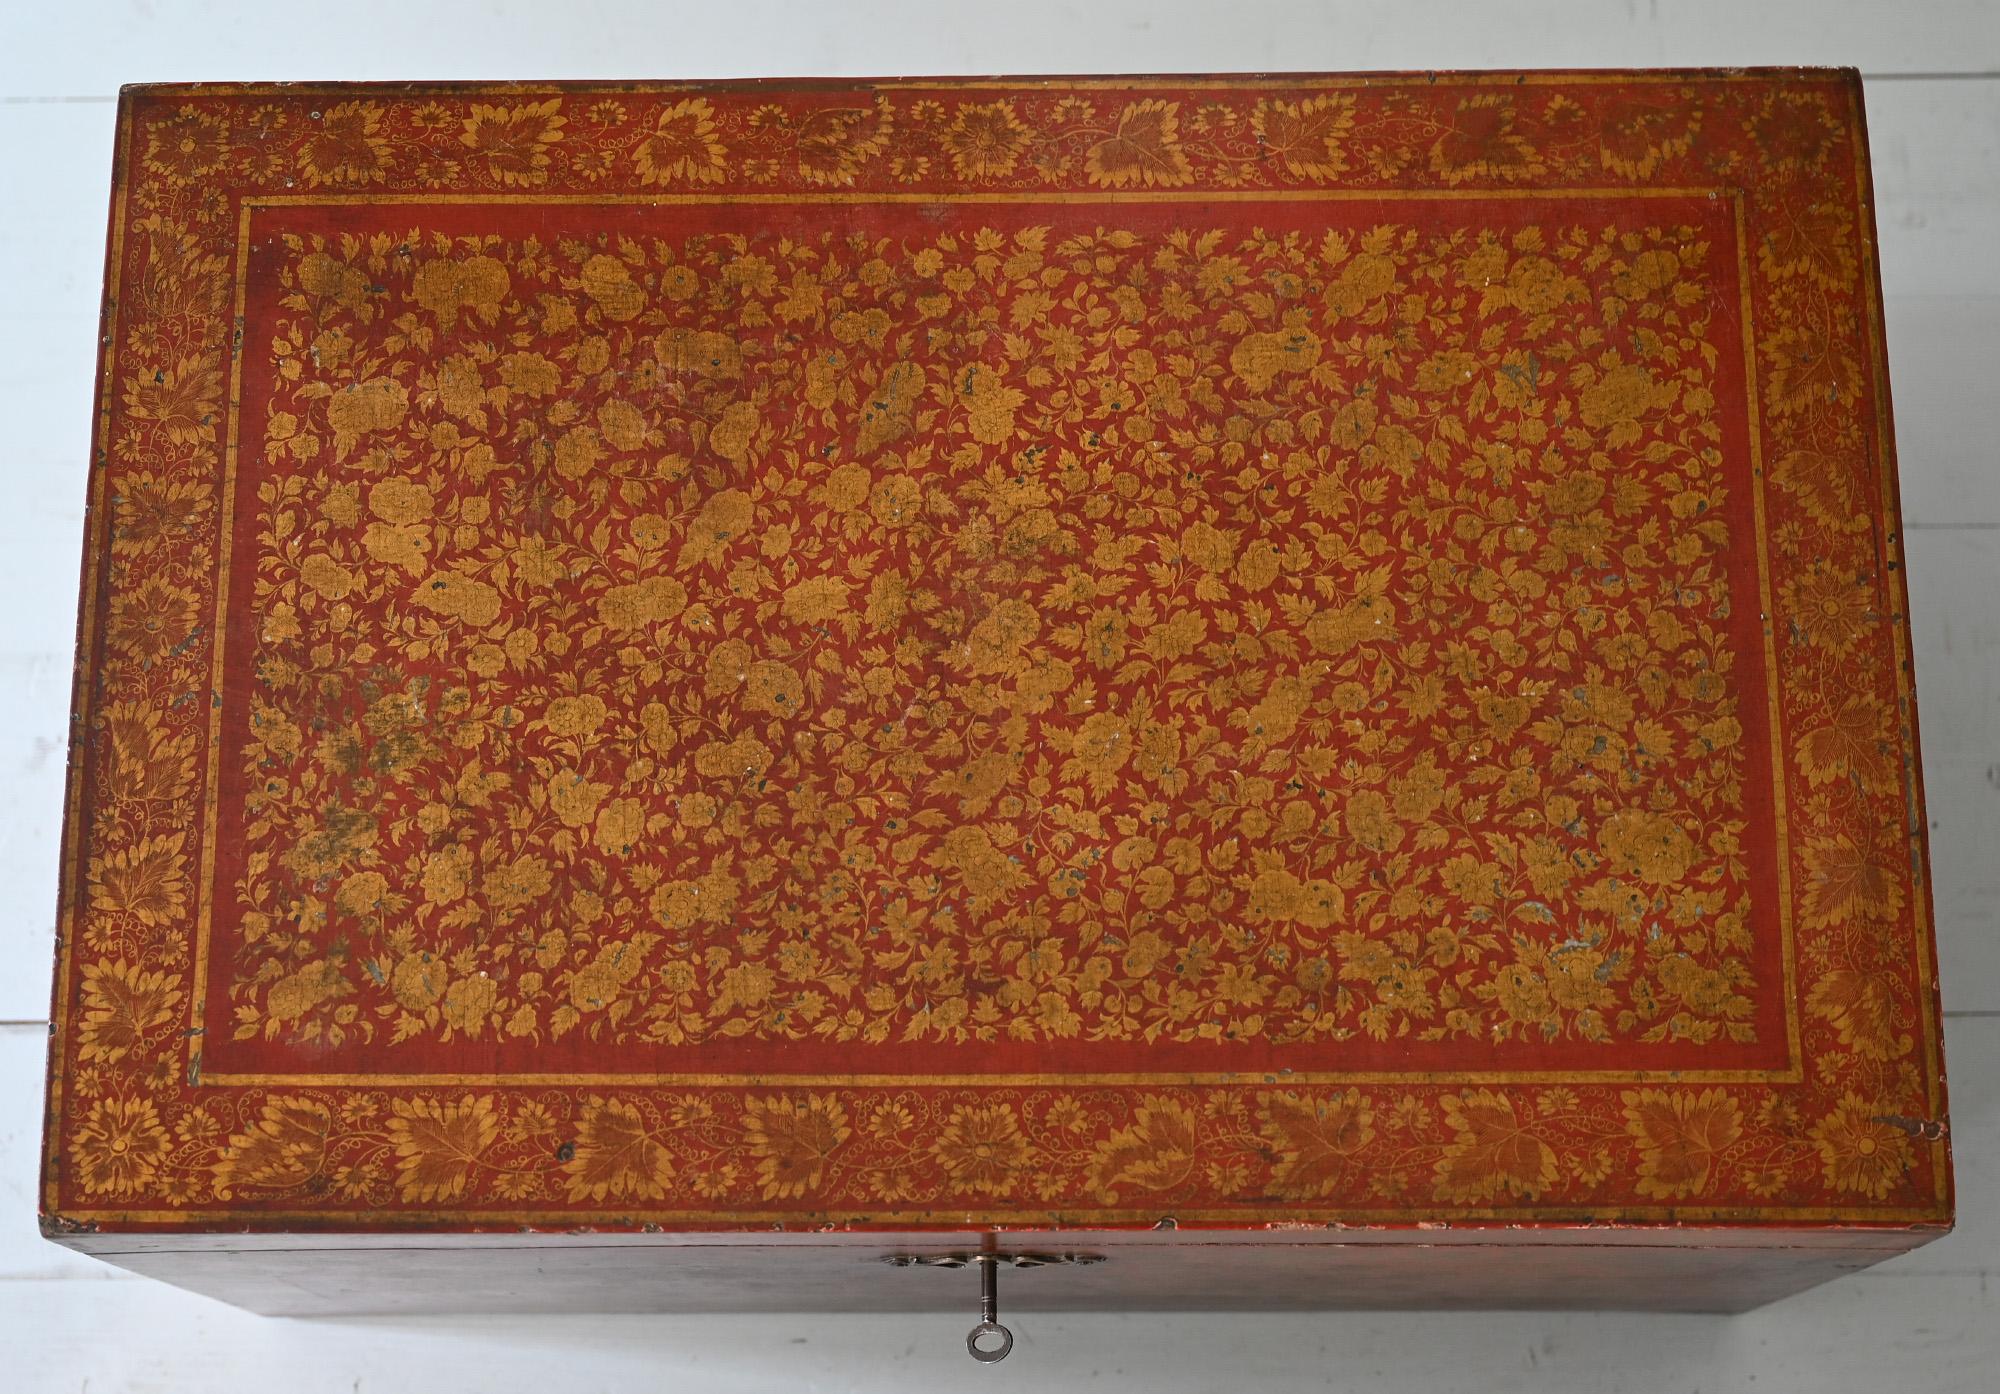 Red lacquered chest on stand 19th century, British India, 1860 

Very charming 19th century chest with wonderful lacquered and gilt flower decorations. Its very rare to find a box like this in red, because they are usually in black. The stand is